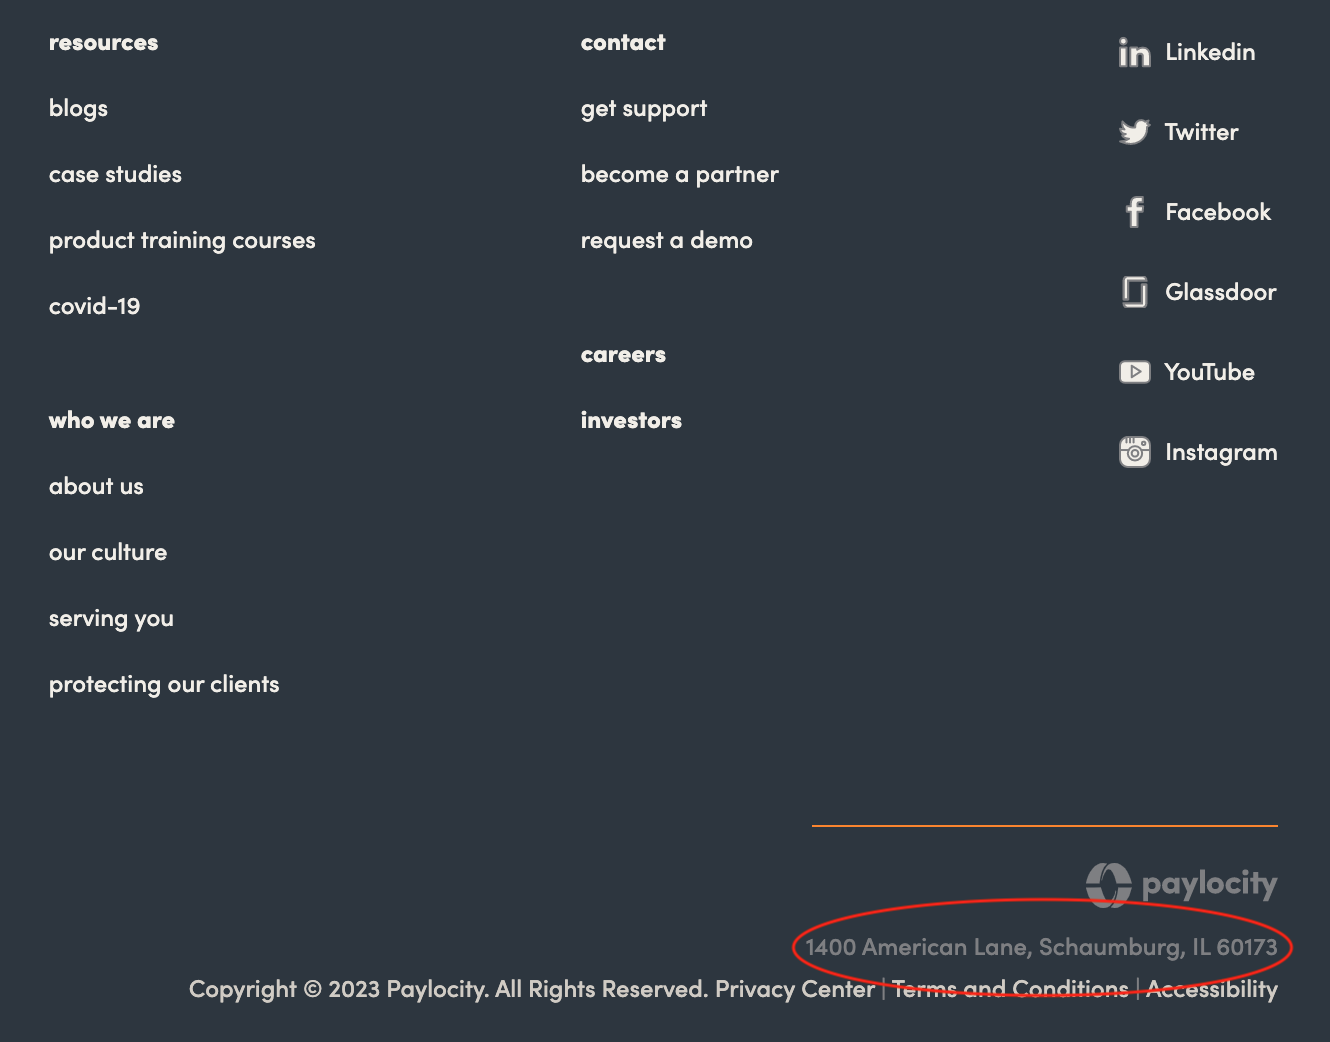 Physical Address Shown in Footer screenshot